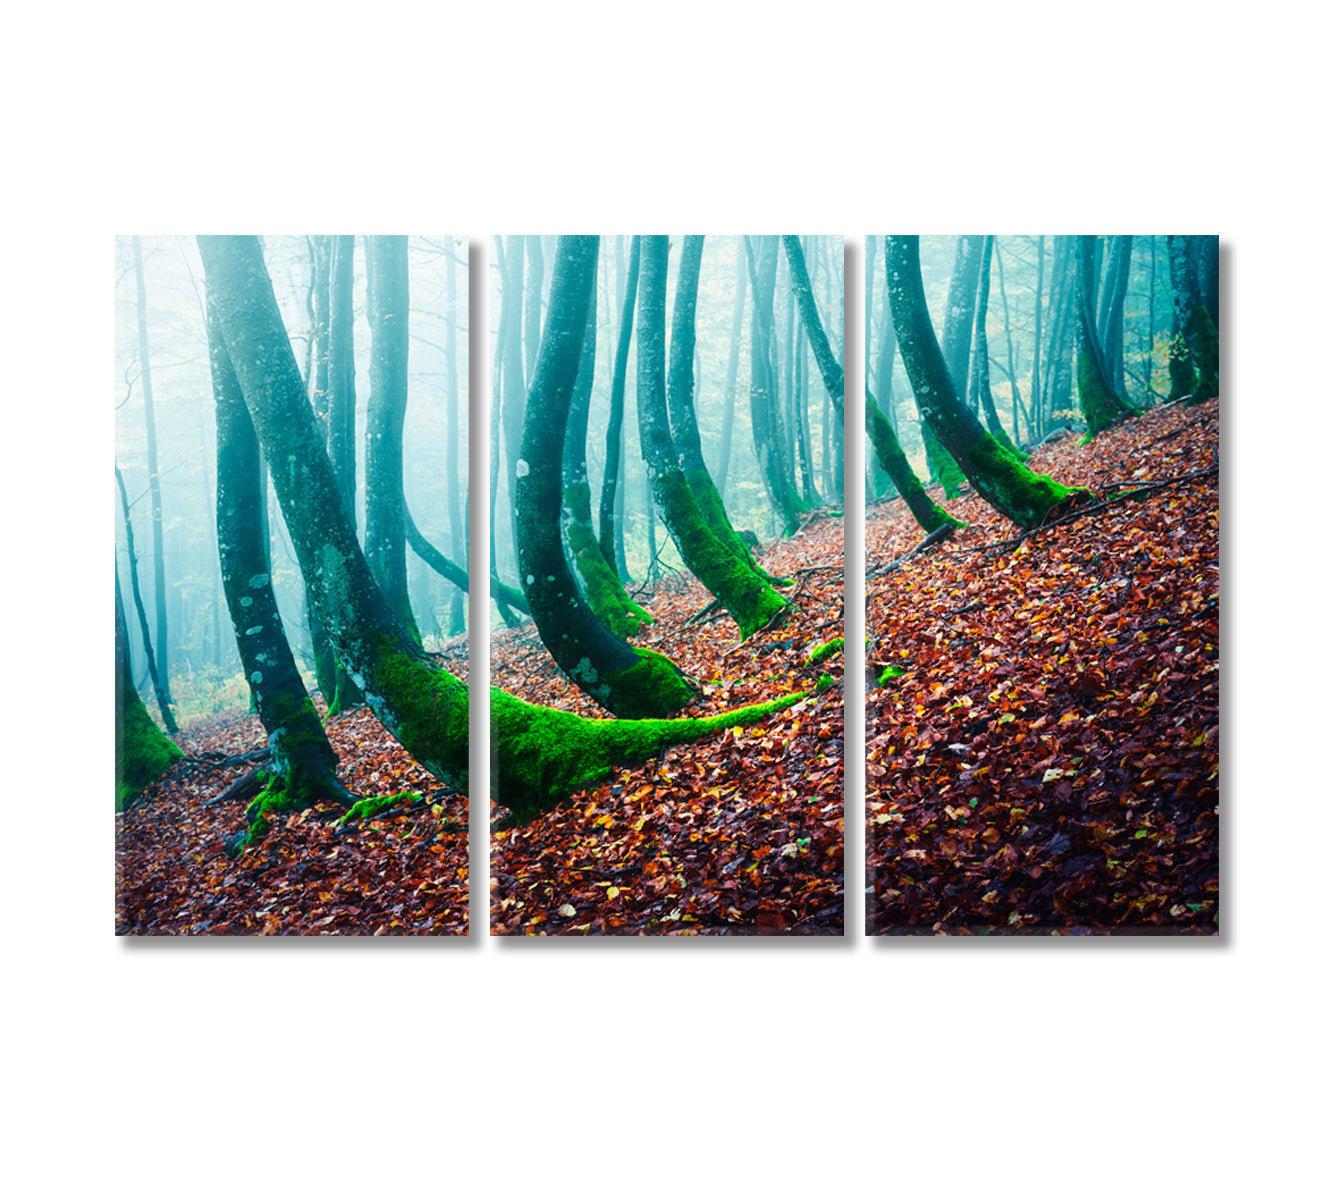 Mysterious Forest with Beech with Moss Canvas Print-Canvas Print-CetArt-3 Panels-36x24 inches-CetArt